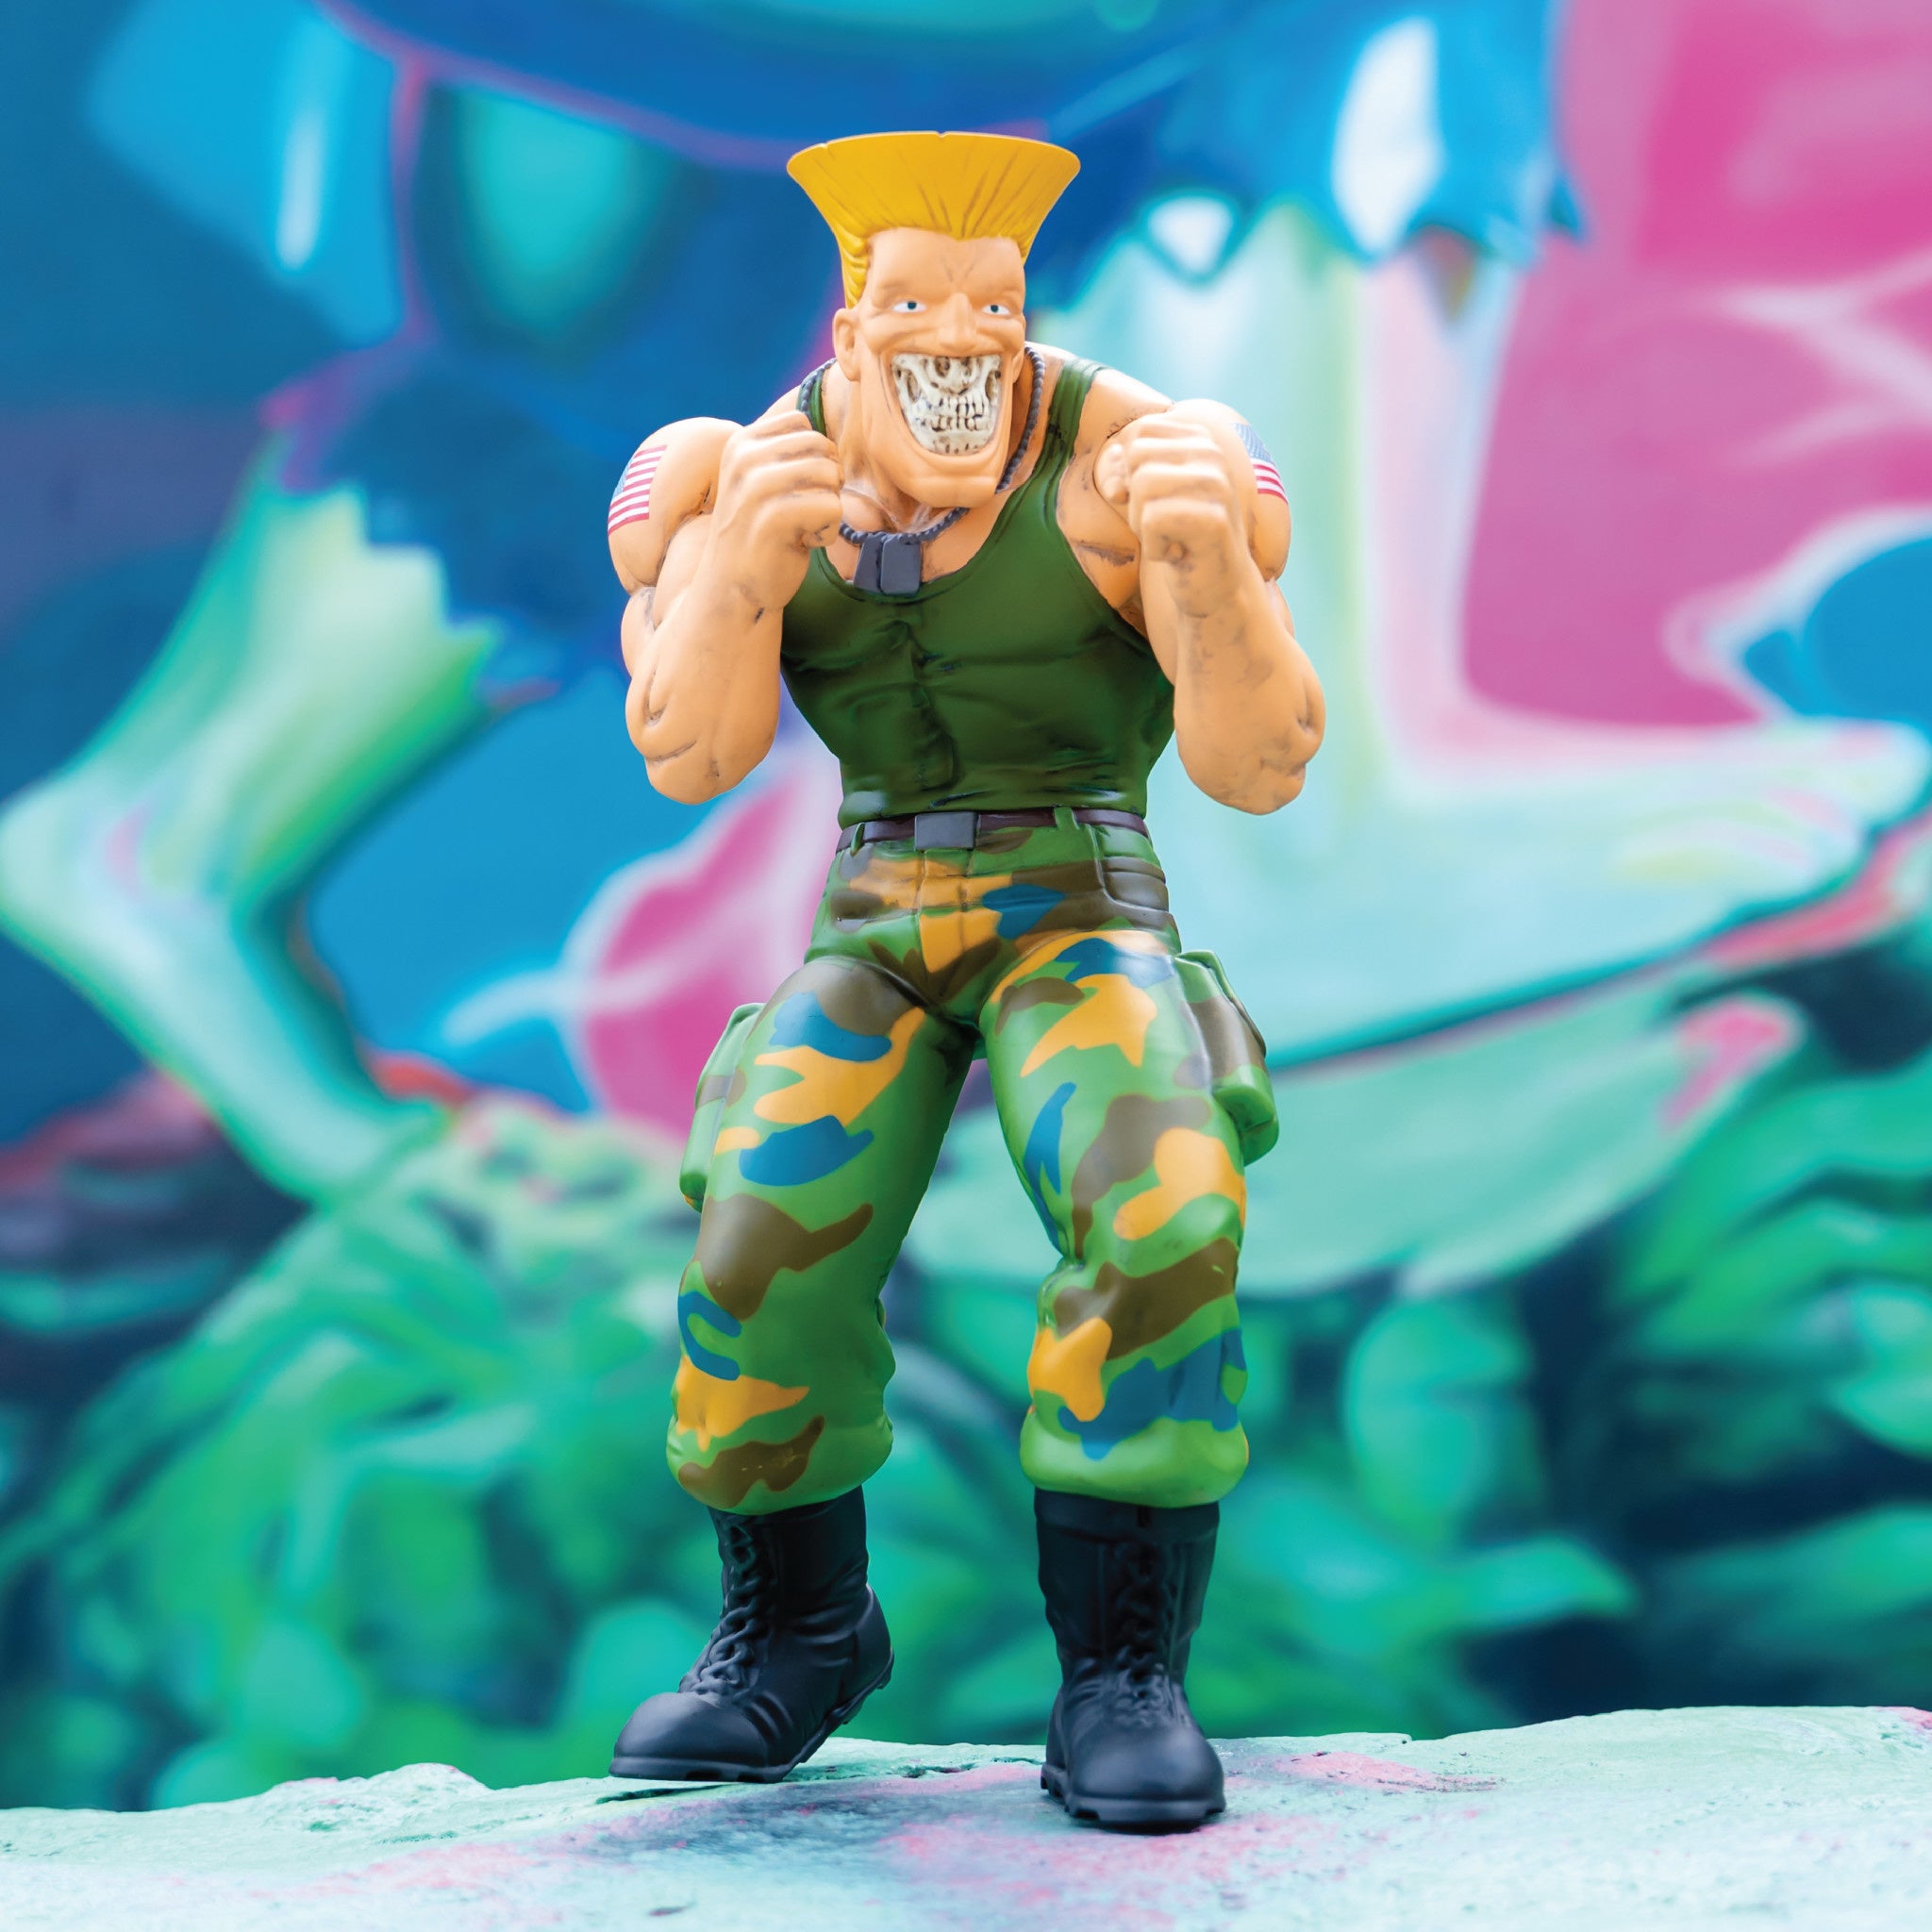 Caneca Street Fighter Guile